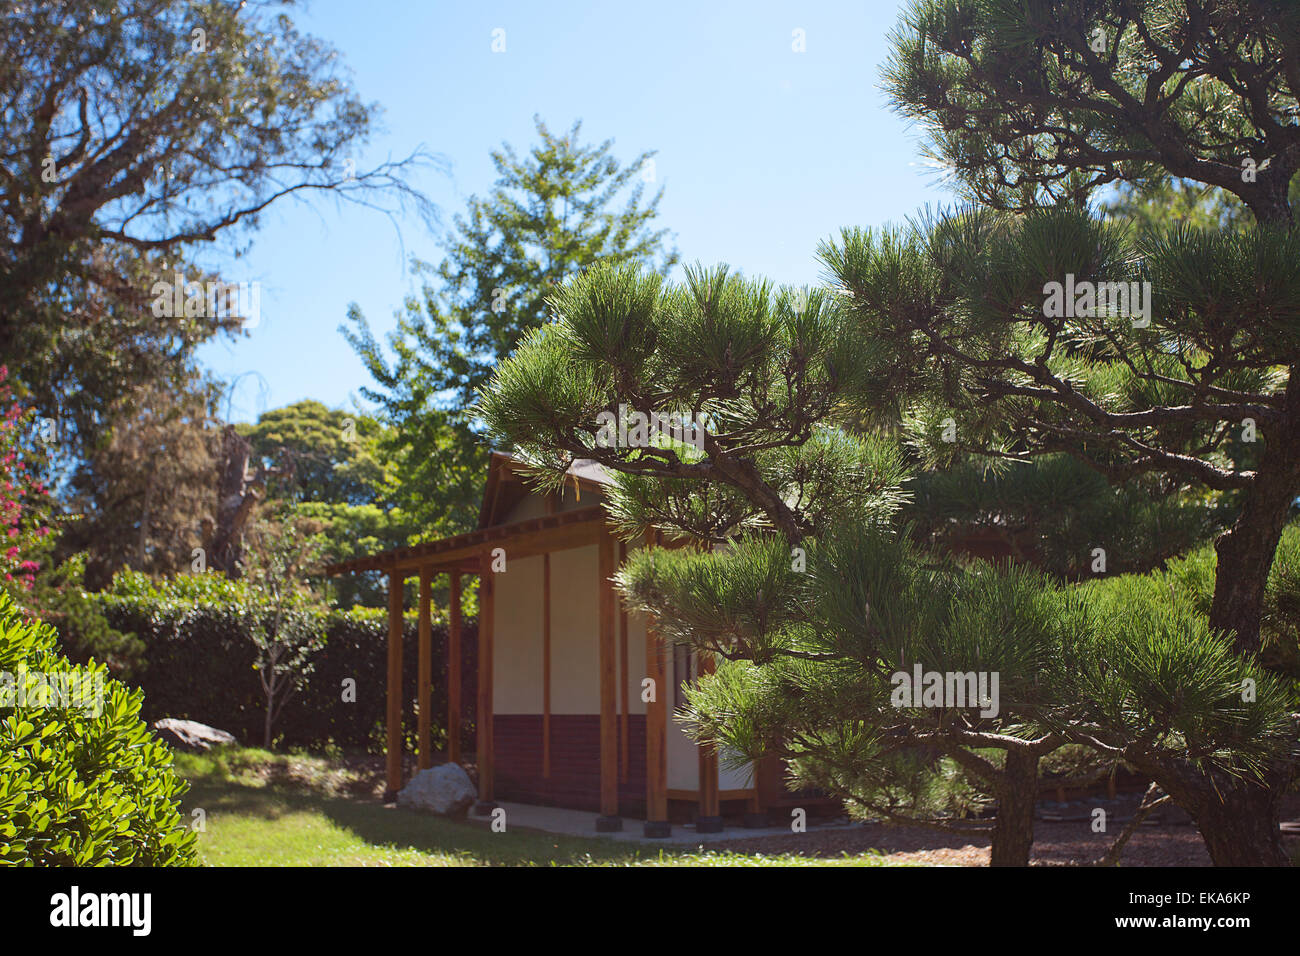 house in Japanese style on background of trees Stock Photo